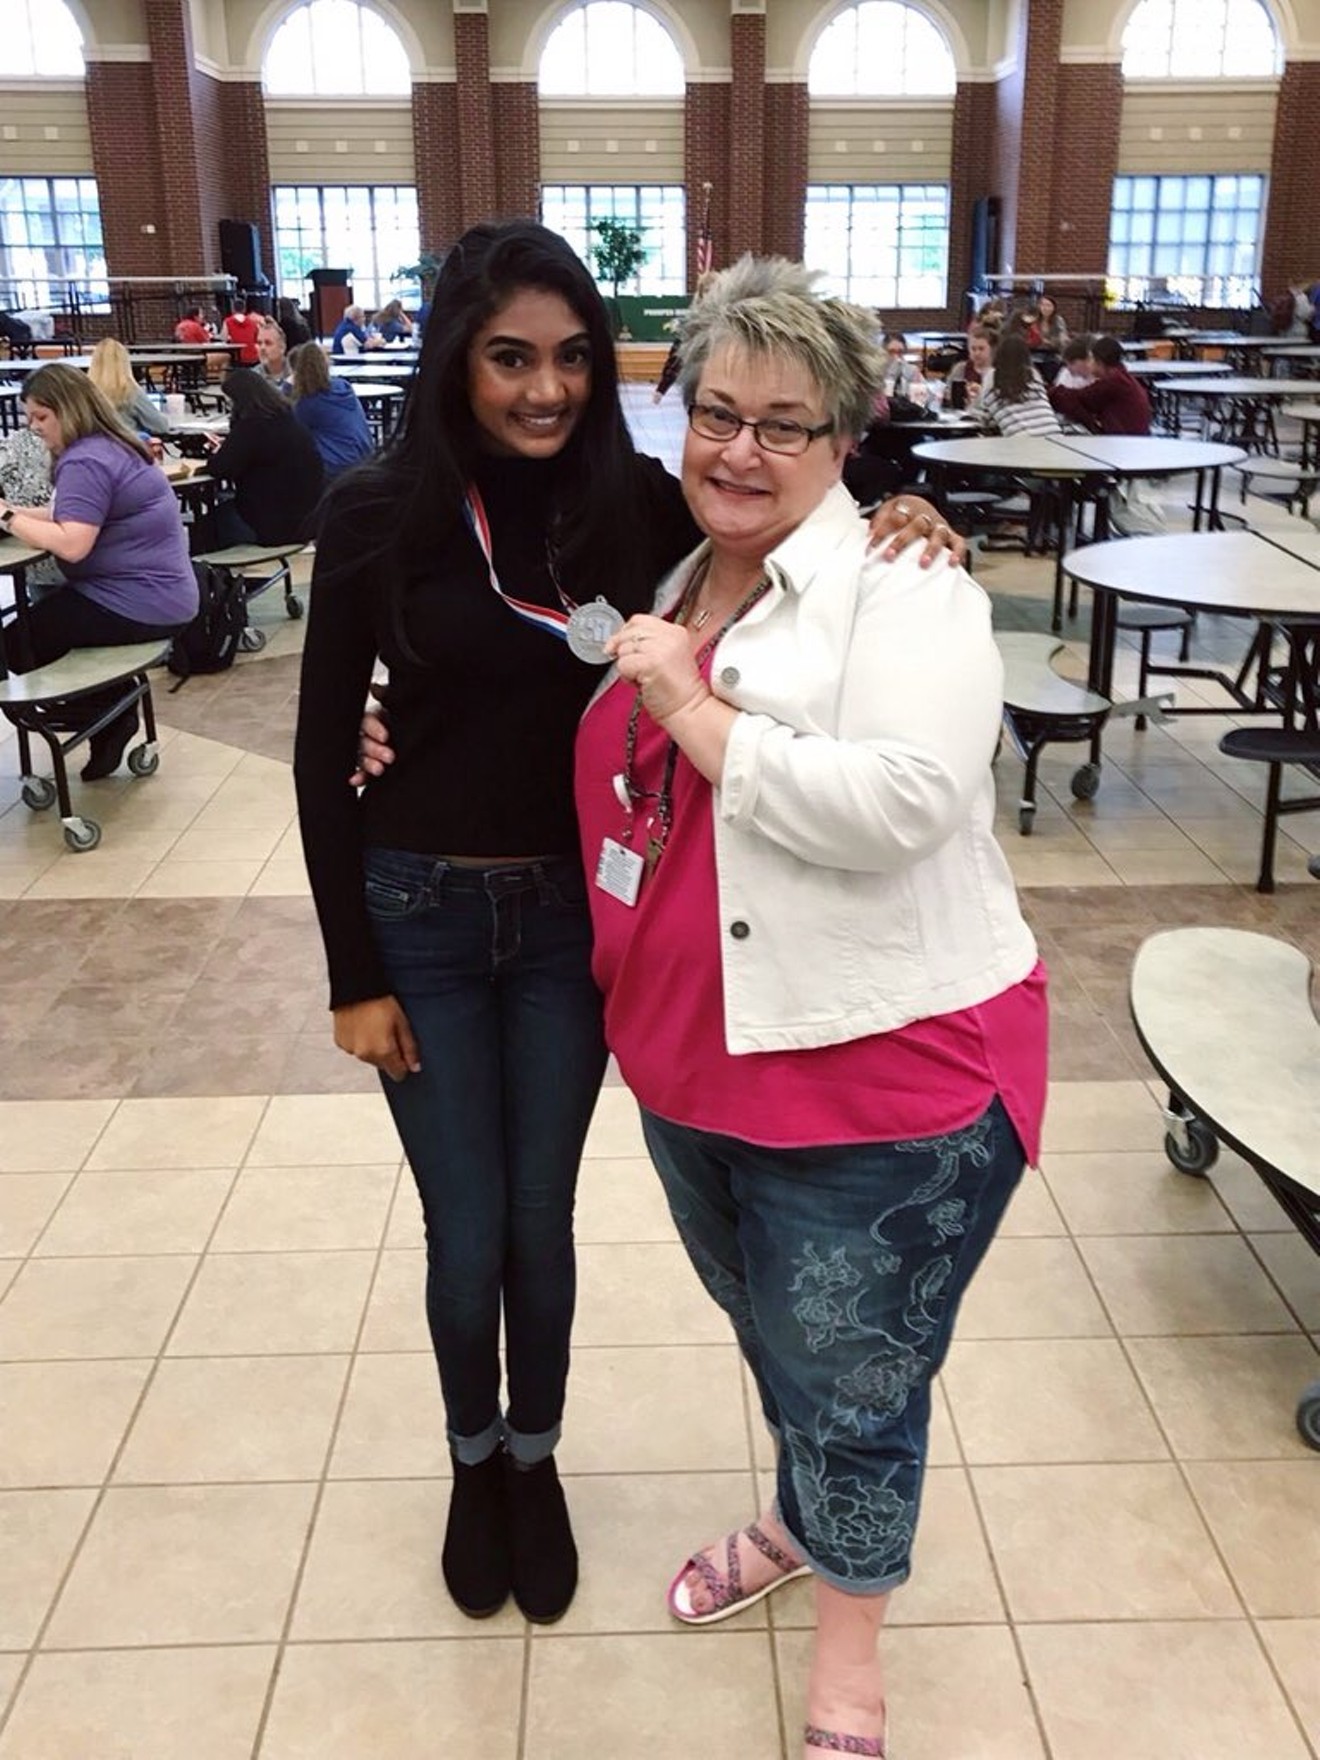 Former Prosper High School journalism instructor Lori Oglesbee-Petter (right) shows off the University Interscholastic League regional competition medal won by Neha Madhira, a senior at Prosper High School and editor-in-chief of the Eagle Nation Online student news website.